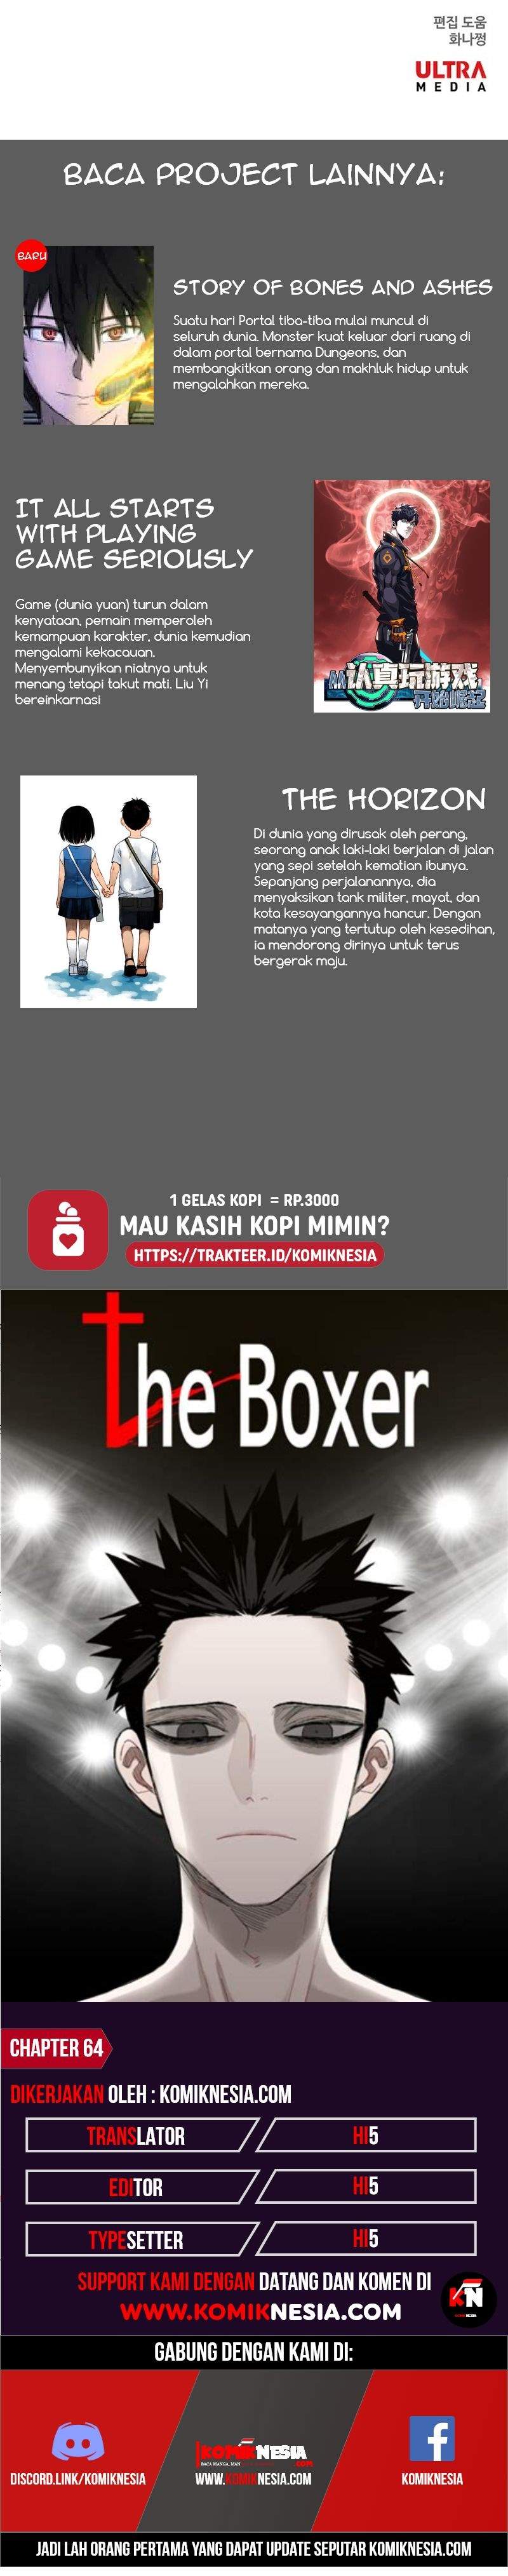 The Boxer Chapter 64